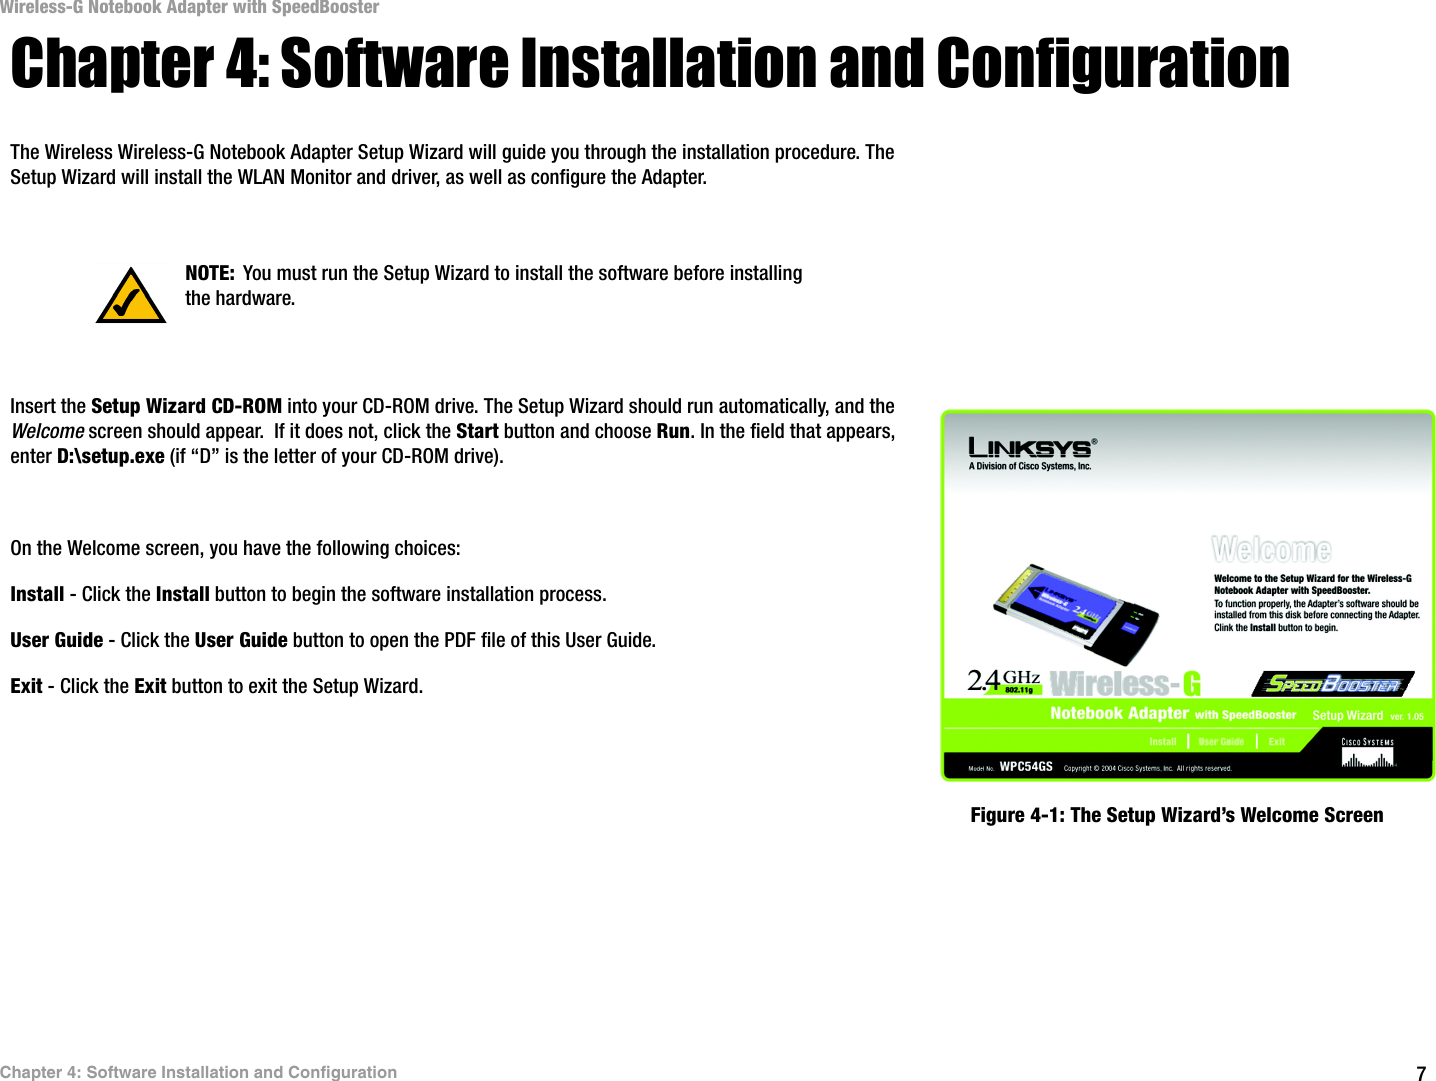 7Chapter 4: Software Installation and ConfigurationWireless-G Notebook Adapter with SpeedBoosterChapter 4: Software Installation and ConfigurationThe Wireless Wireless-G Notebook Adapter Setup Wizard will guide you through the installation procedure. The Setup Wizard will install the WLAN Monitor and driver, as well as configure the Adapter.Insert the Setup Wizard CD-ROM into your CD-ROM drive. The Setup Wizard should run automatically, and the Welcome screen should appear.  If it does not, click the Start button and choose Run. In the field that appears, enter D:\setup.exe (if “D” is the letter of your CD-ROM drive). On the Welcome screen, you have the following choices:Install - Click the Install button to begin the software installation process. User Guide - Click the User Guide button to open the PDF file of this User Guide. Exit - Click the Exit button to exit the Setup Wizard.NOTE: You must run the Setup Wizard to install the software before installing the hardware.Figure 4-1: The Setup Wizard’s Welcome Screen